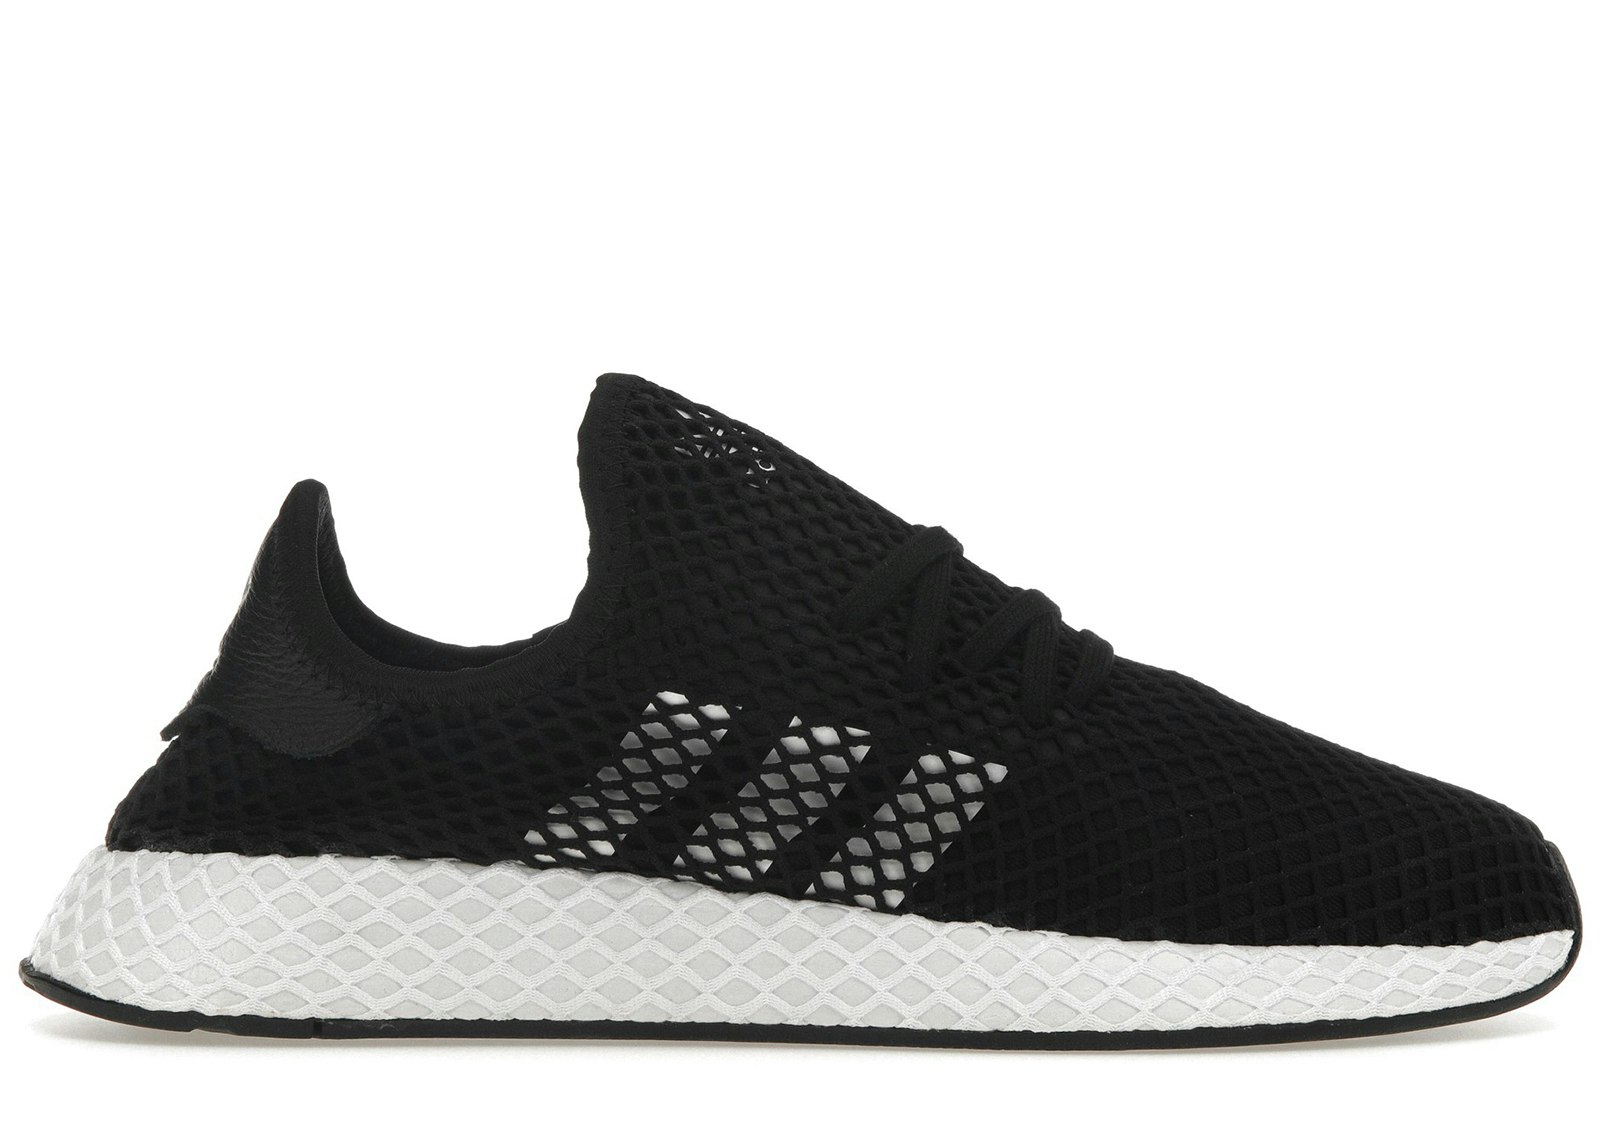 adidas Mens Originals Deerupt Runner Shoes (White, Core Black, Size - 11)  in Delhi at best price by Balaji Shoes - Justdial